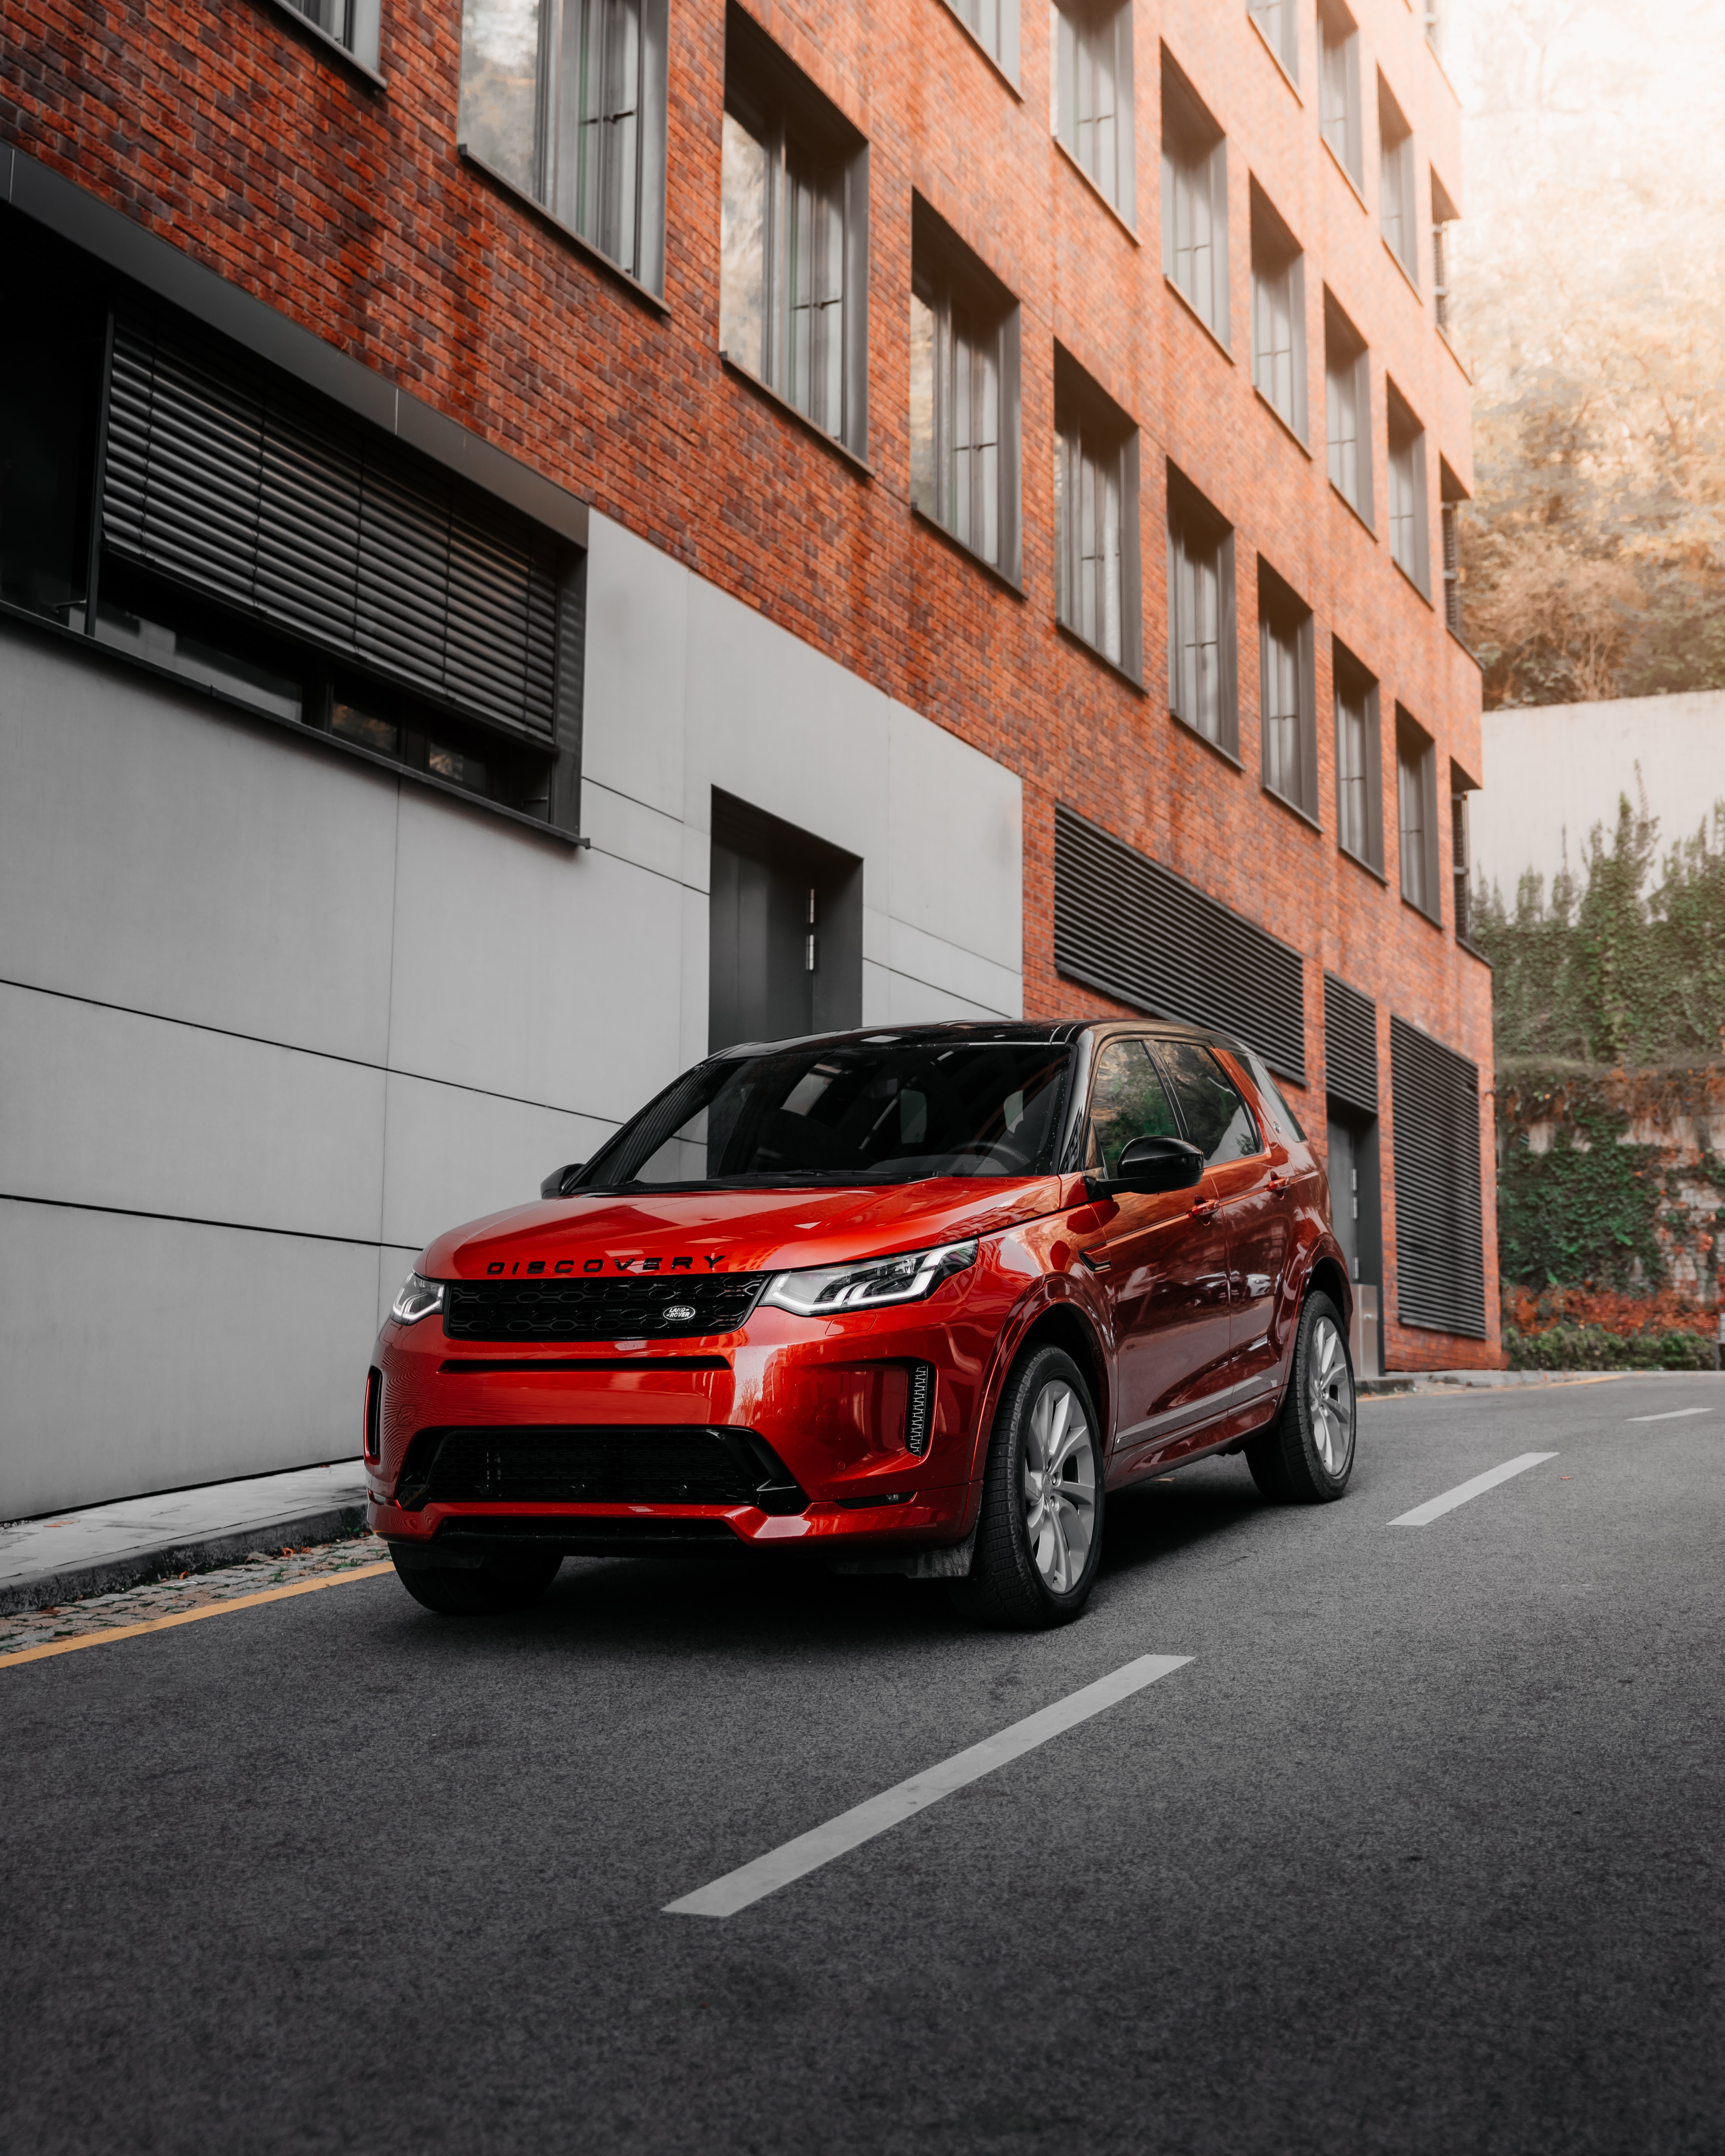 suv, land rover, land rover discovery, car, cars, red